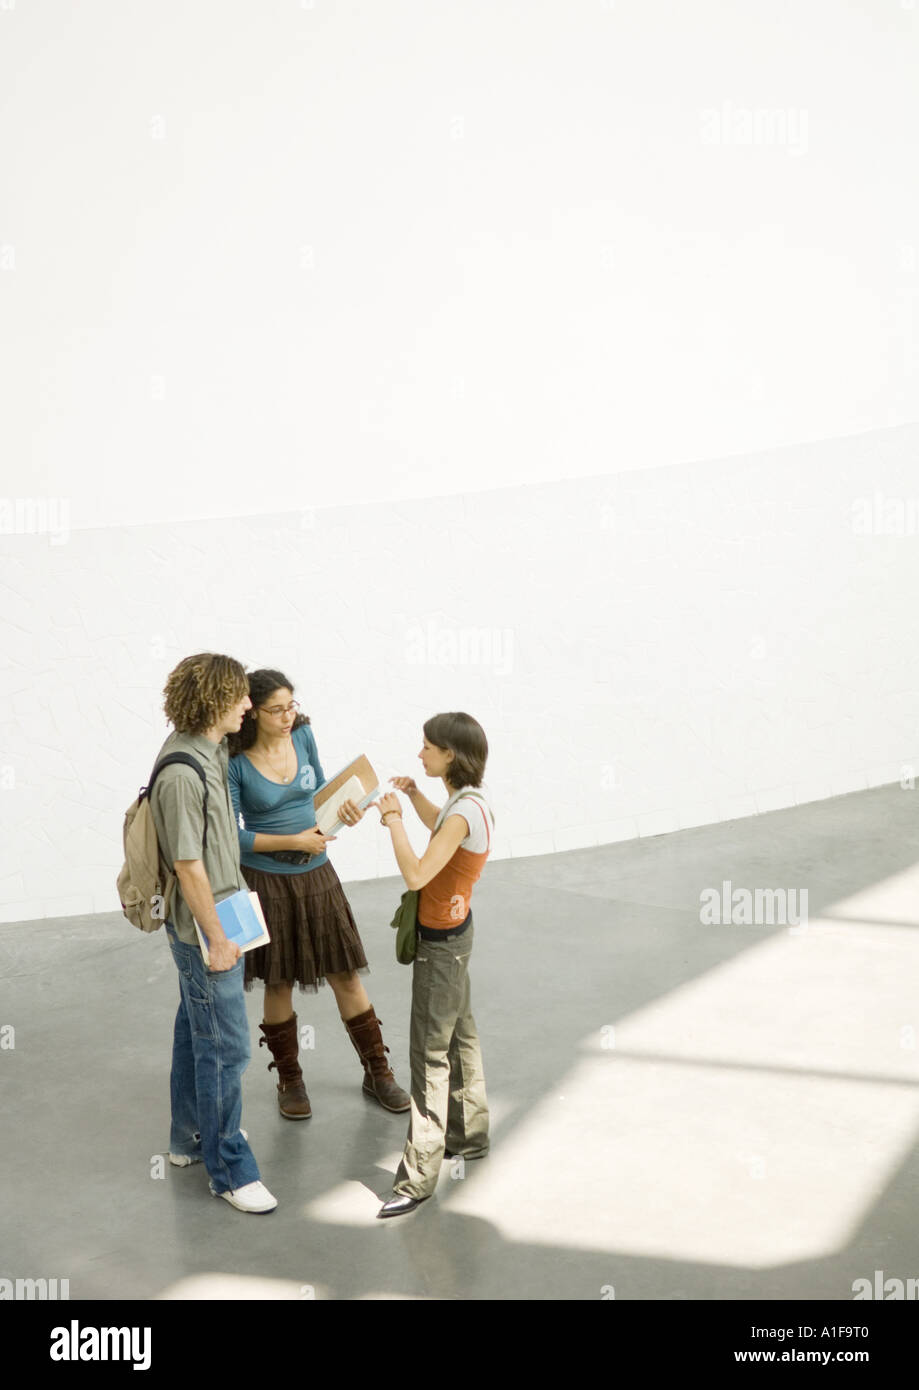 Group of students standing together, talking in lobby Stock Photo